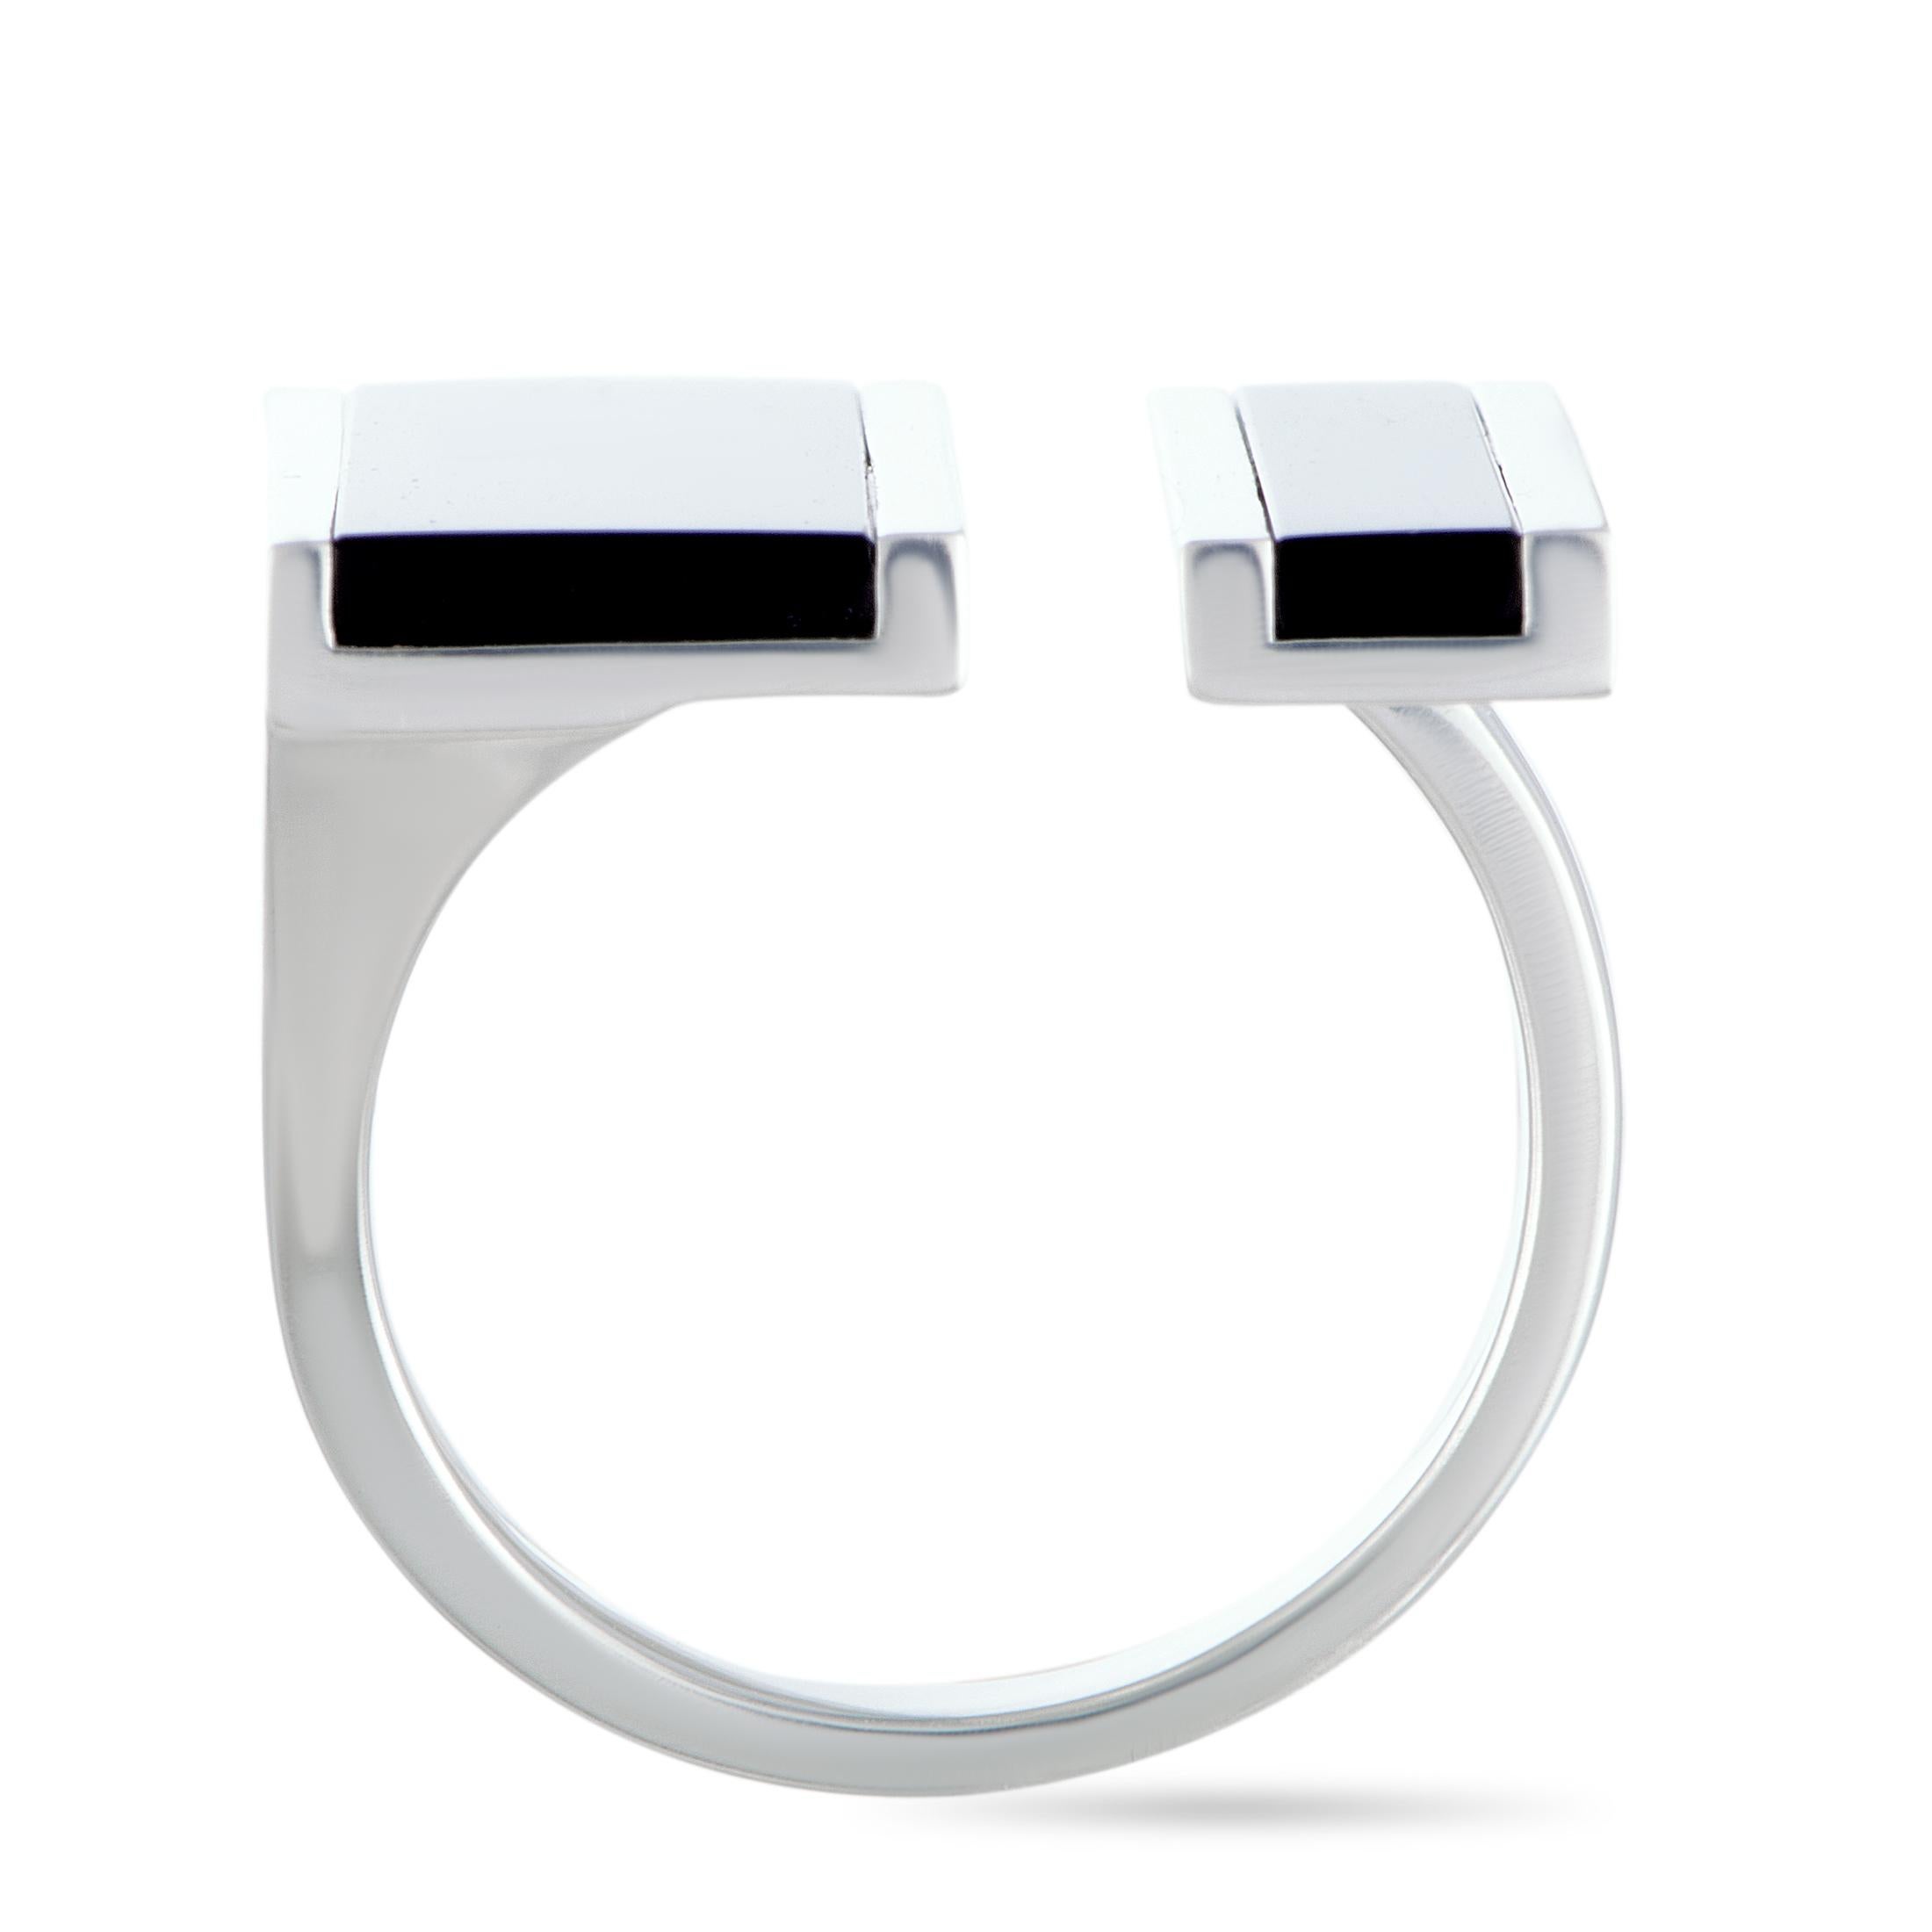 The Georg Jensen “Aria” ring is crafted from silver and set with two onyx stones. It weighs 10.5 grams, boasting band thickness of 3 mm and top height of 2 mm, while top dimensions measure 24 by 24 mm.

This piece is offered in brand new condition